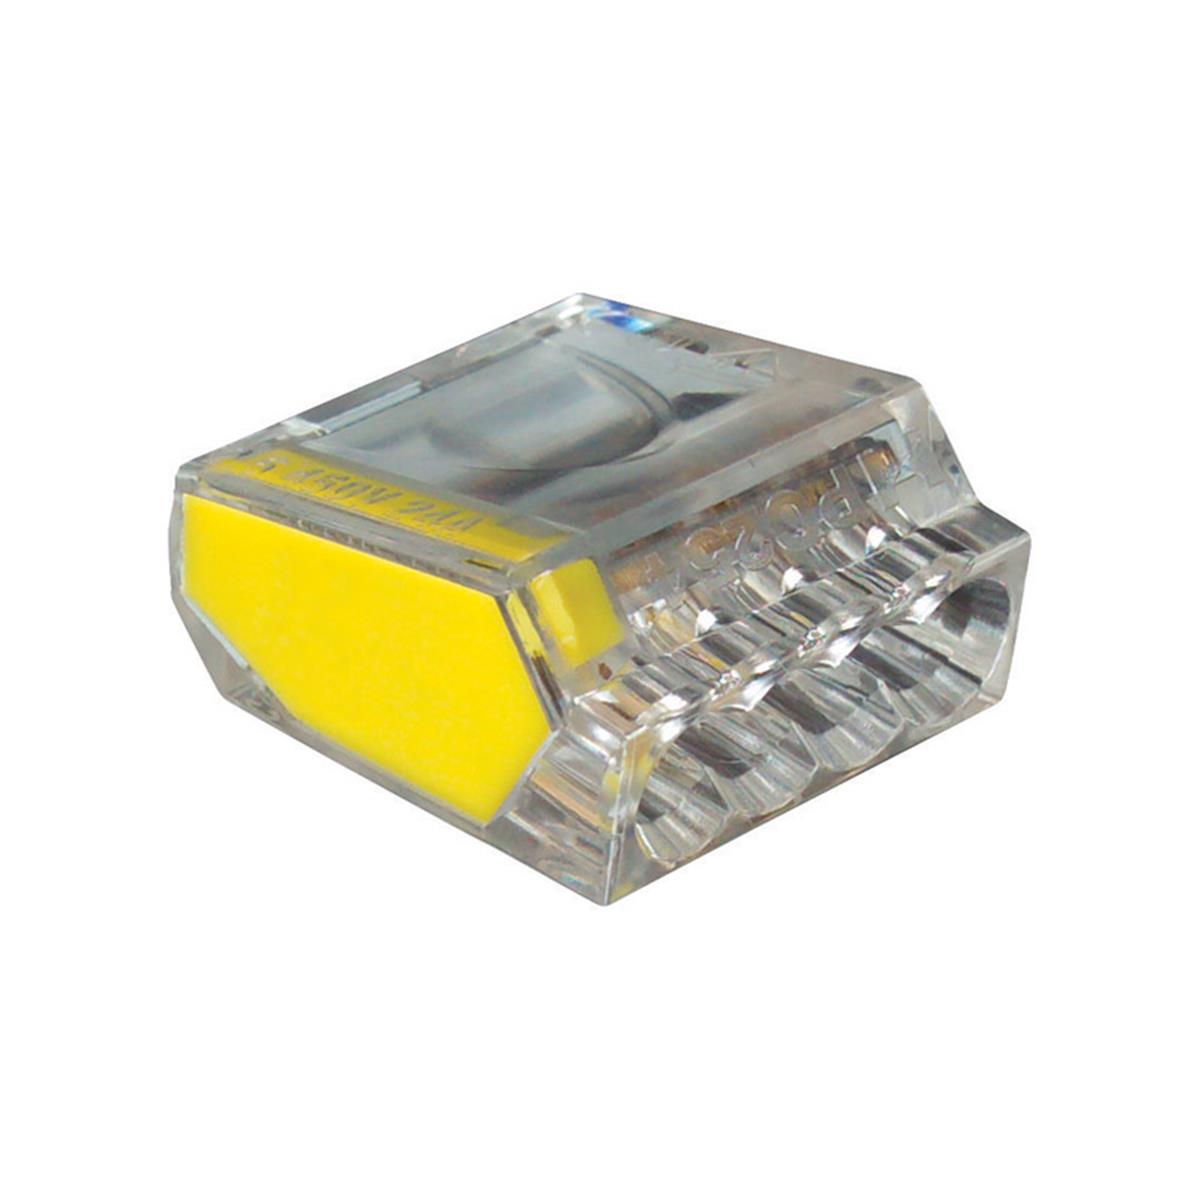 Picture of ECCM Industries 3569670 4 Port Yellow Connector, Pack of 100